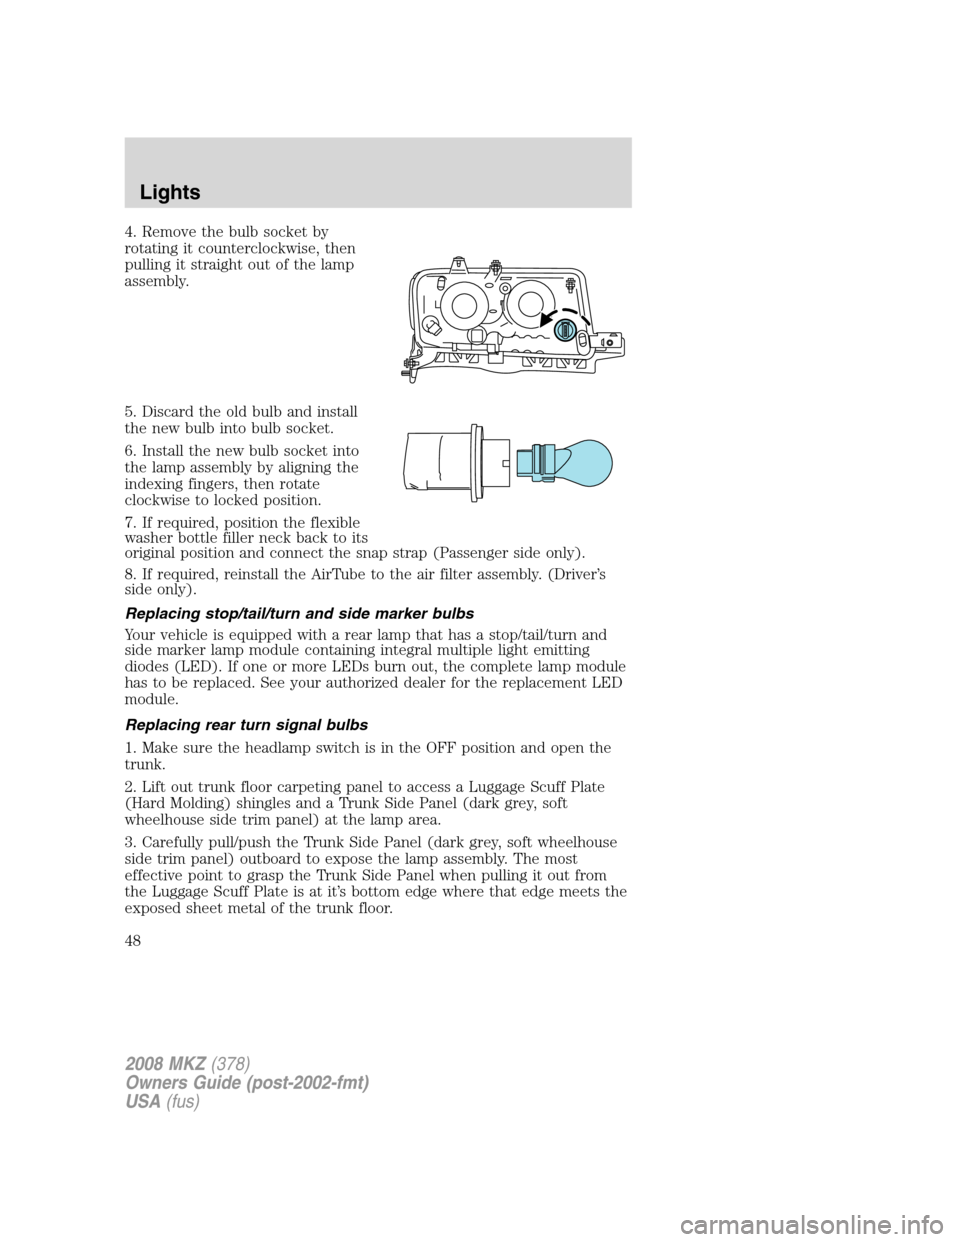 LINCOLN MKZ 2008 Service Manual 4. Remove the bulb socket by
rotating it counterclockwise, then
pulling it straight out of the lamp
assembly.
5. Discard the old bulb and install
the new bulb into bulb socket.
6. Install the new bulb